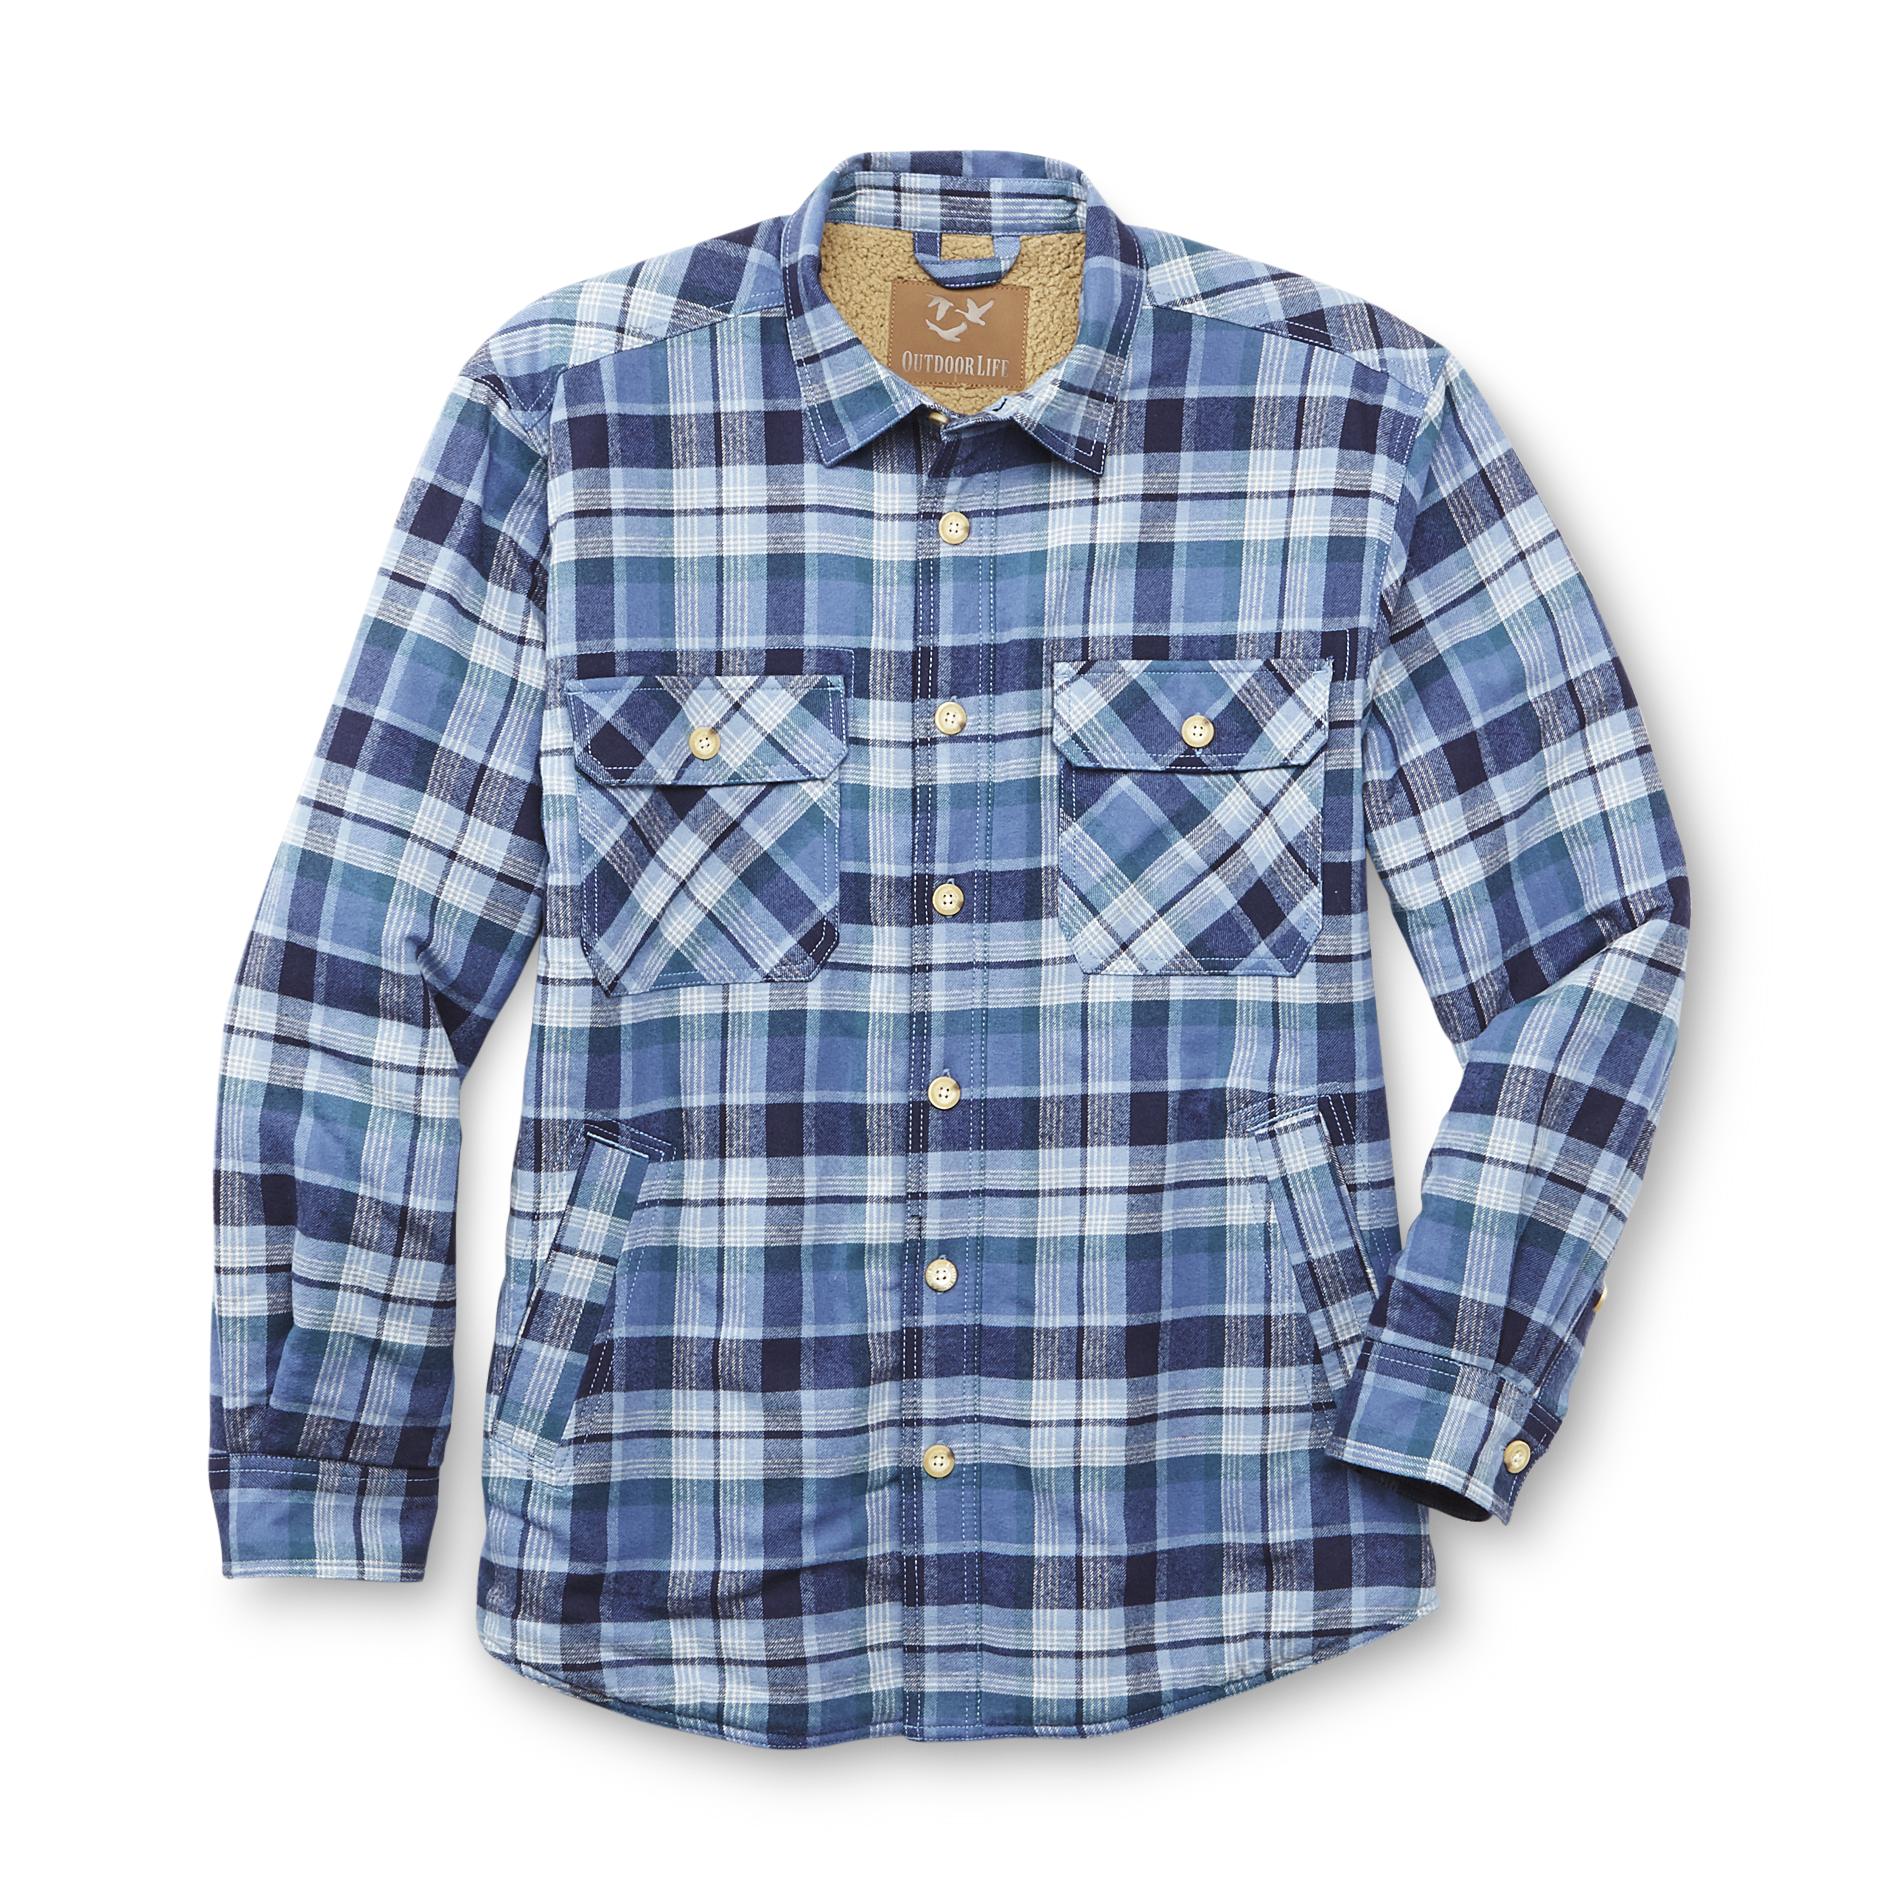 Outdoor Life Men's Sherpa-Lined Flannel Shirt Jacket - Plaid